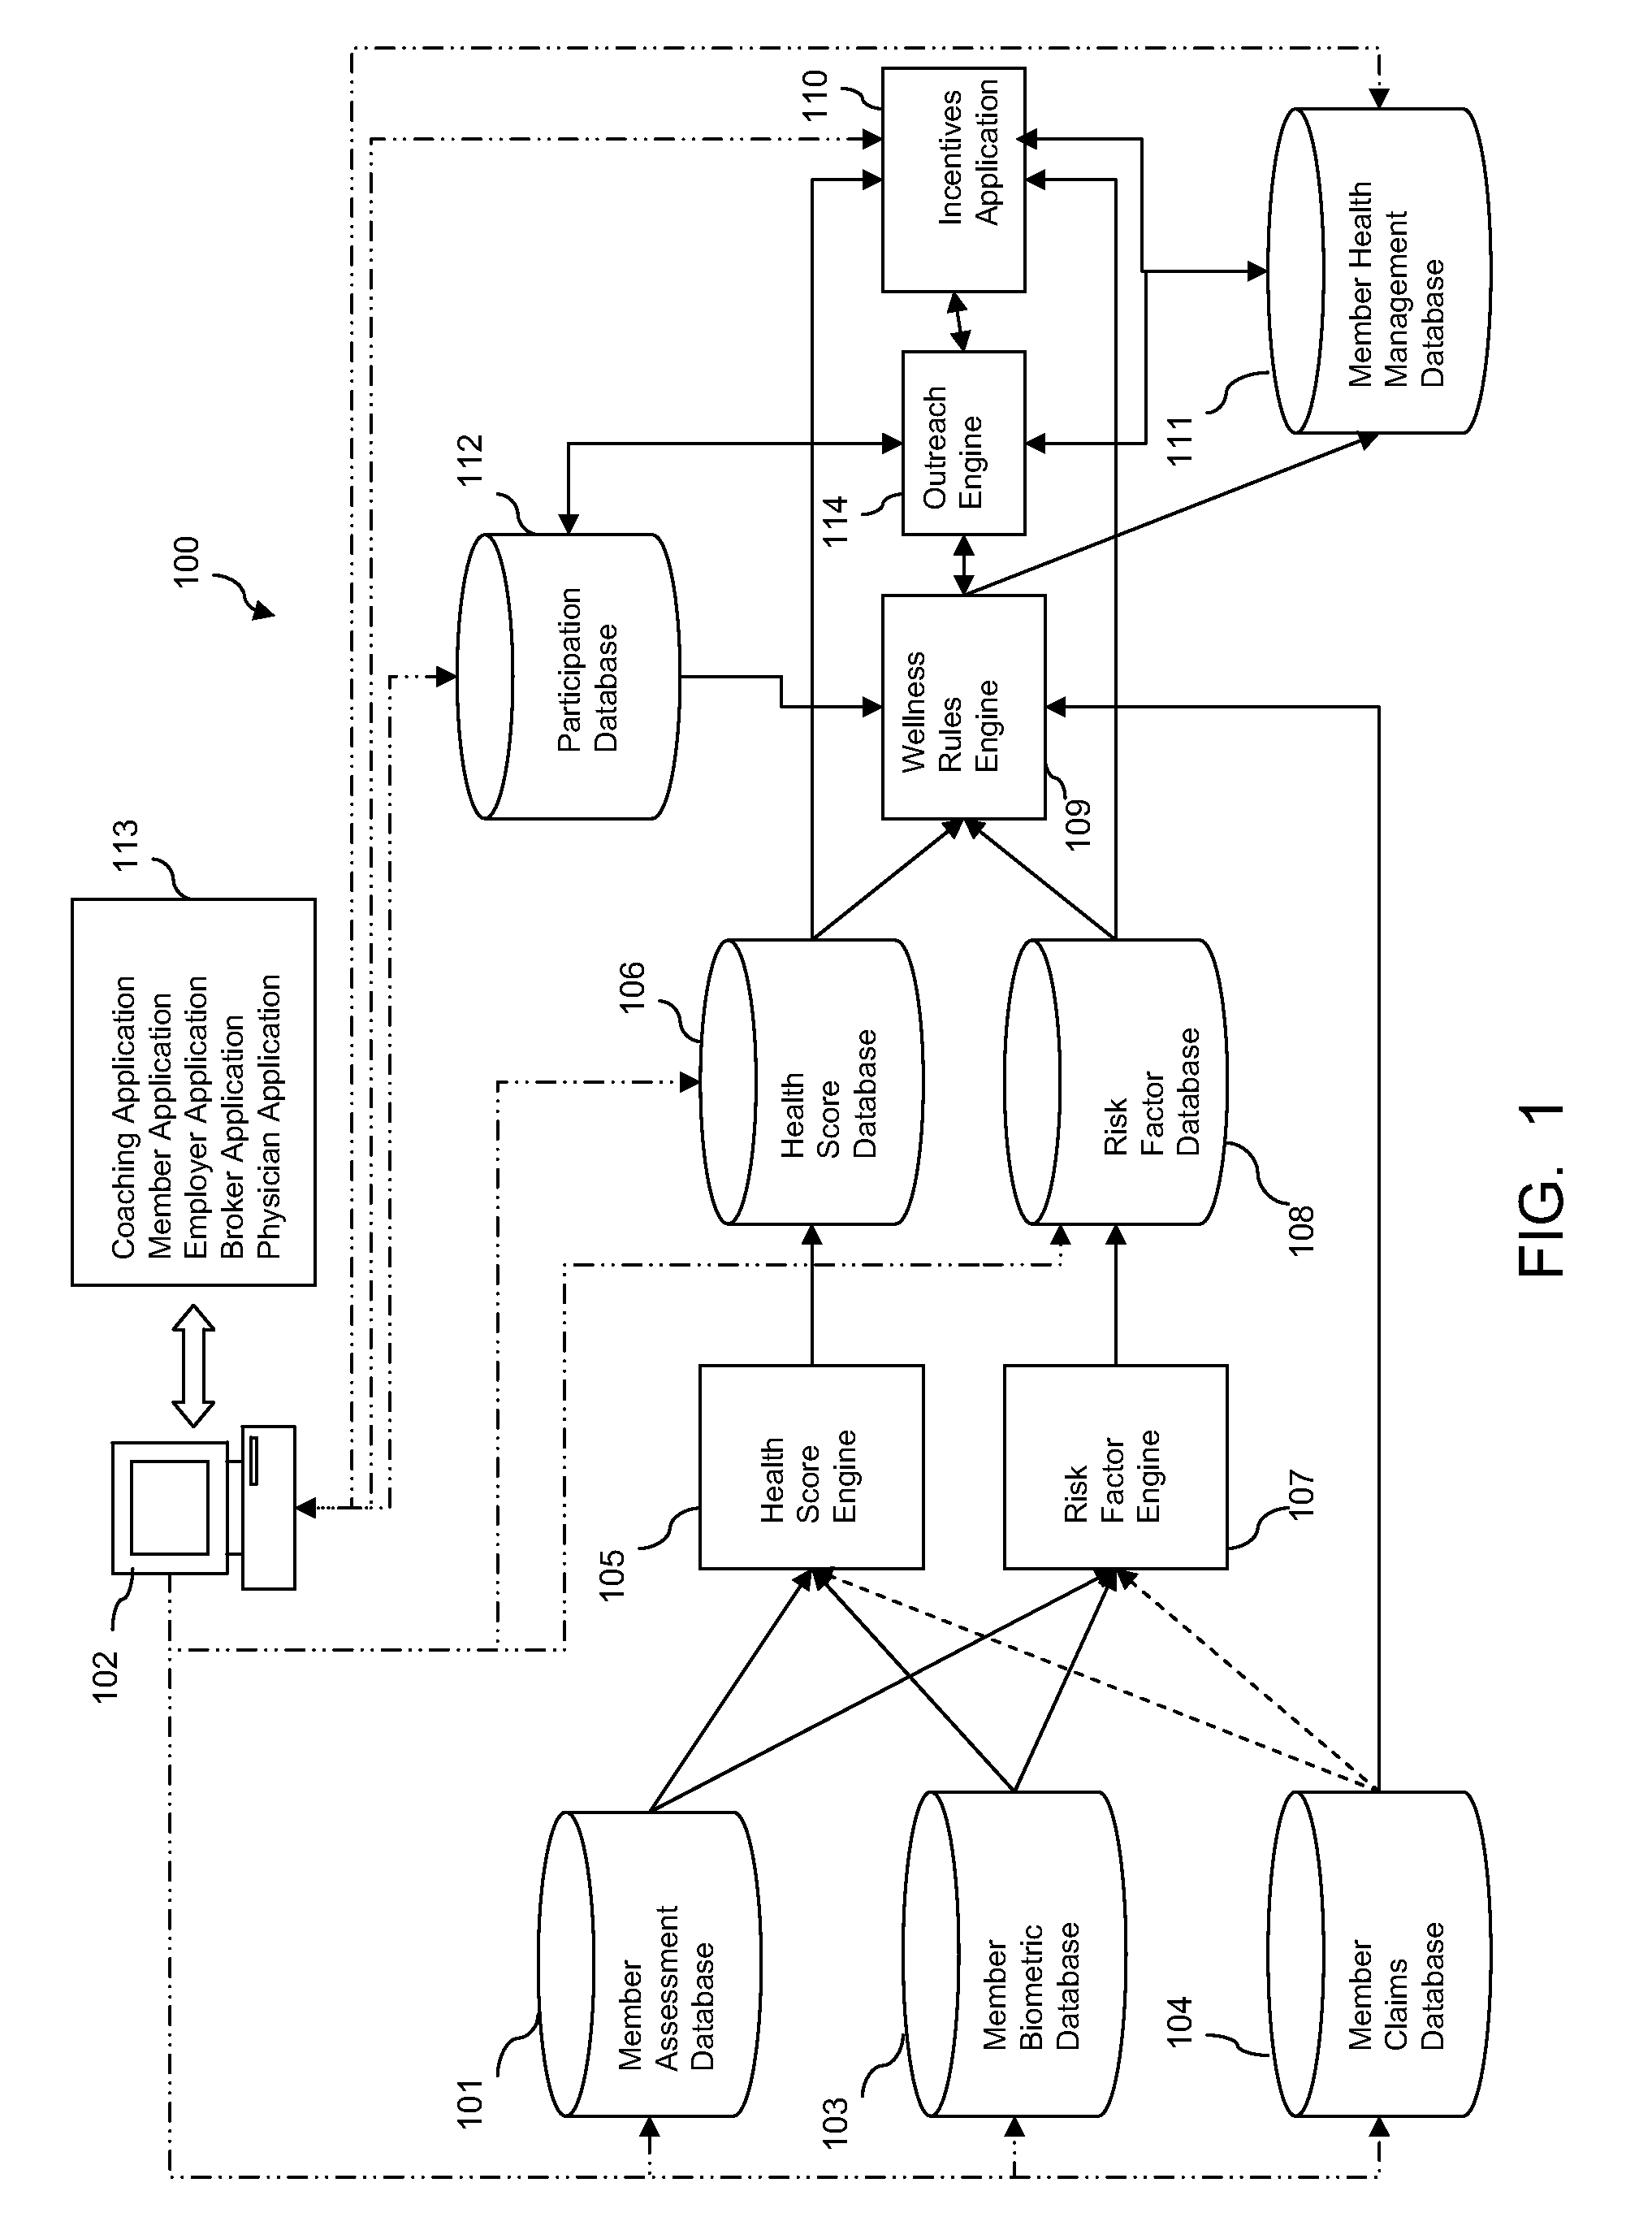 System and Method for Providing Health Management Services to a Population of Members